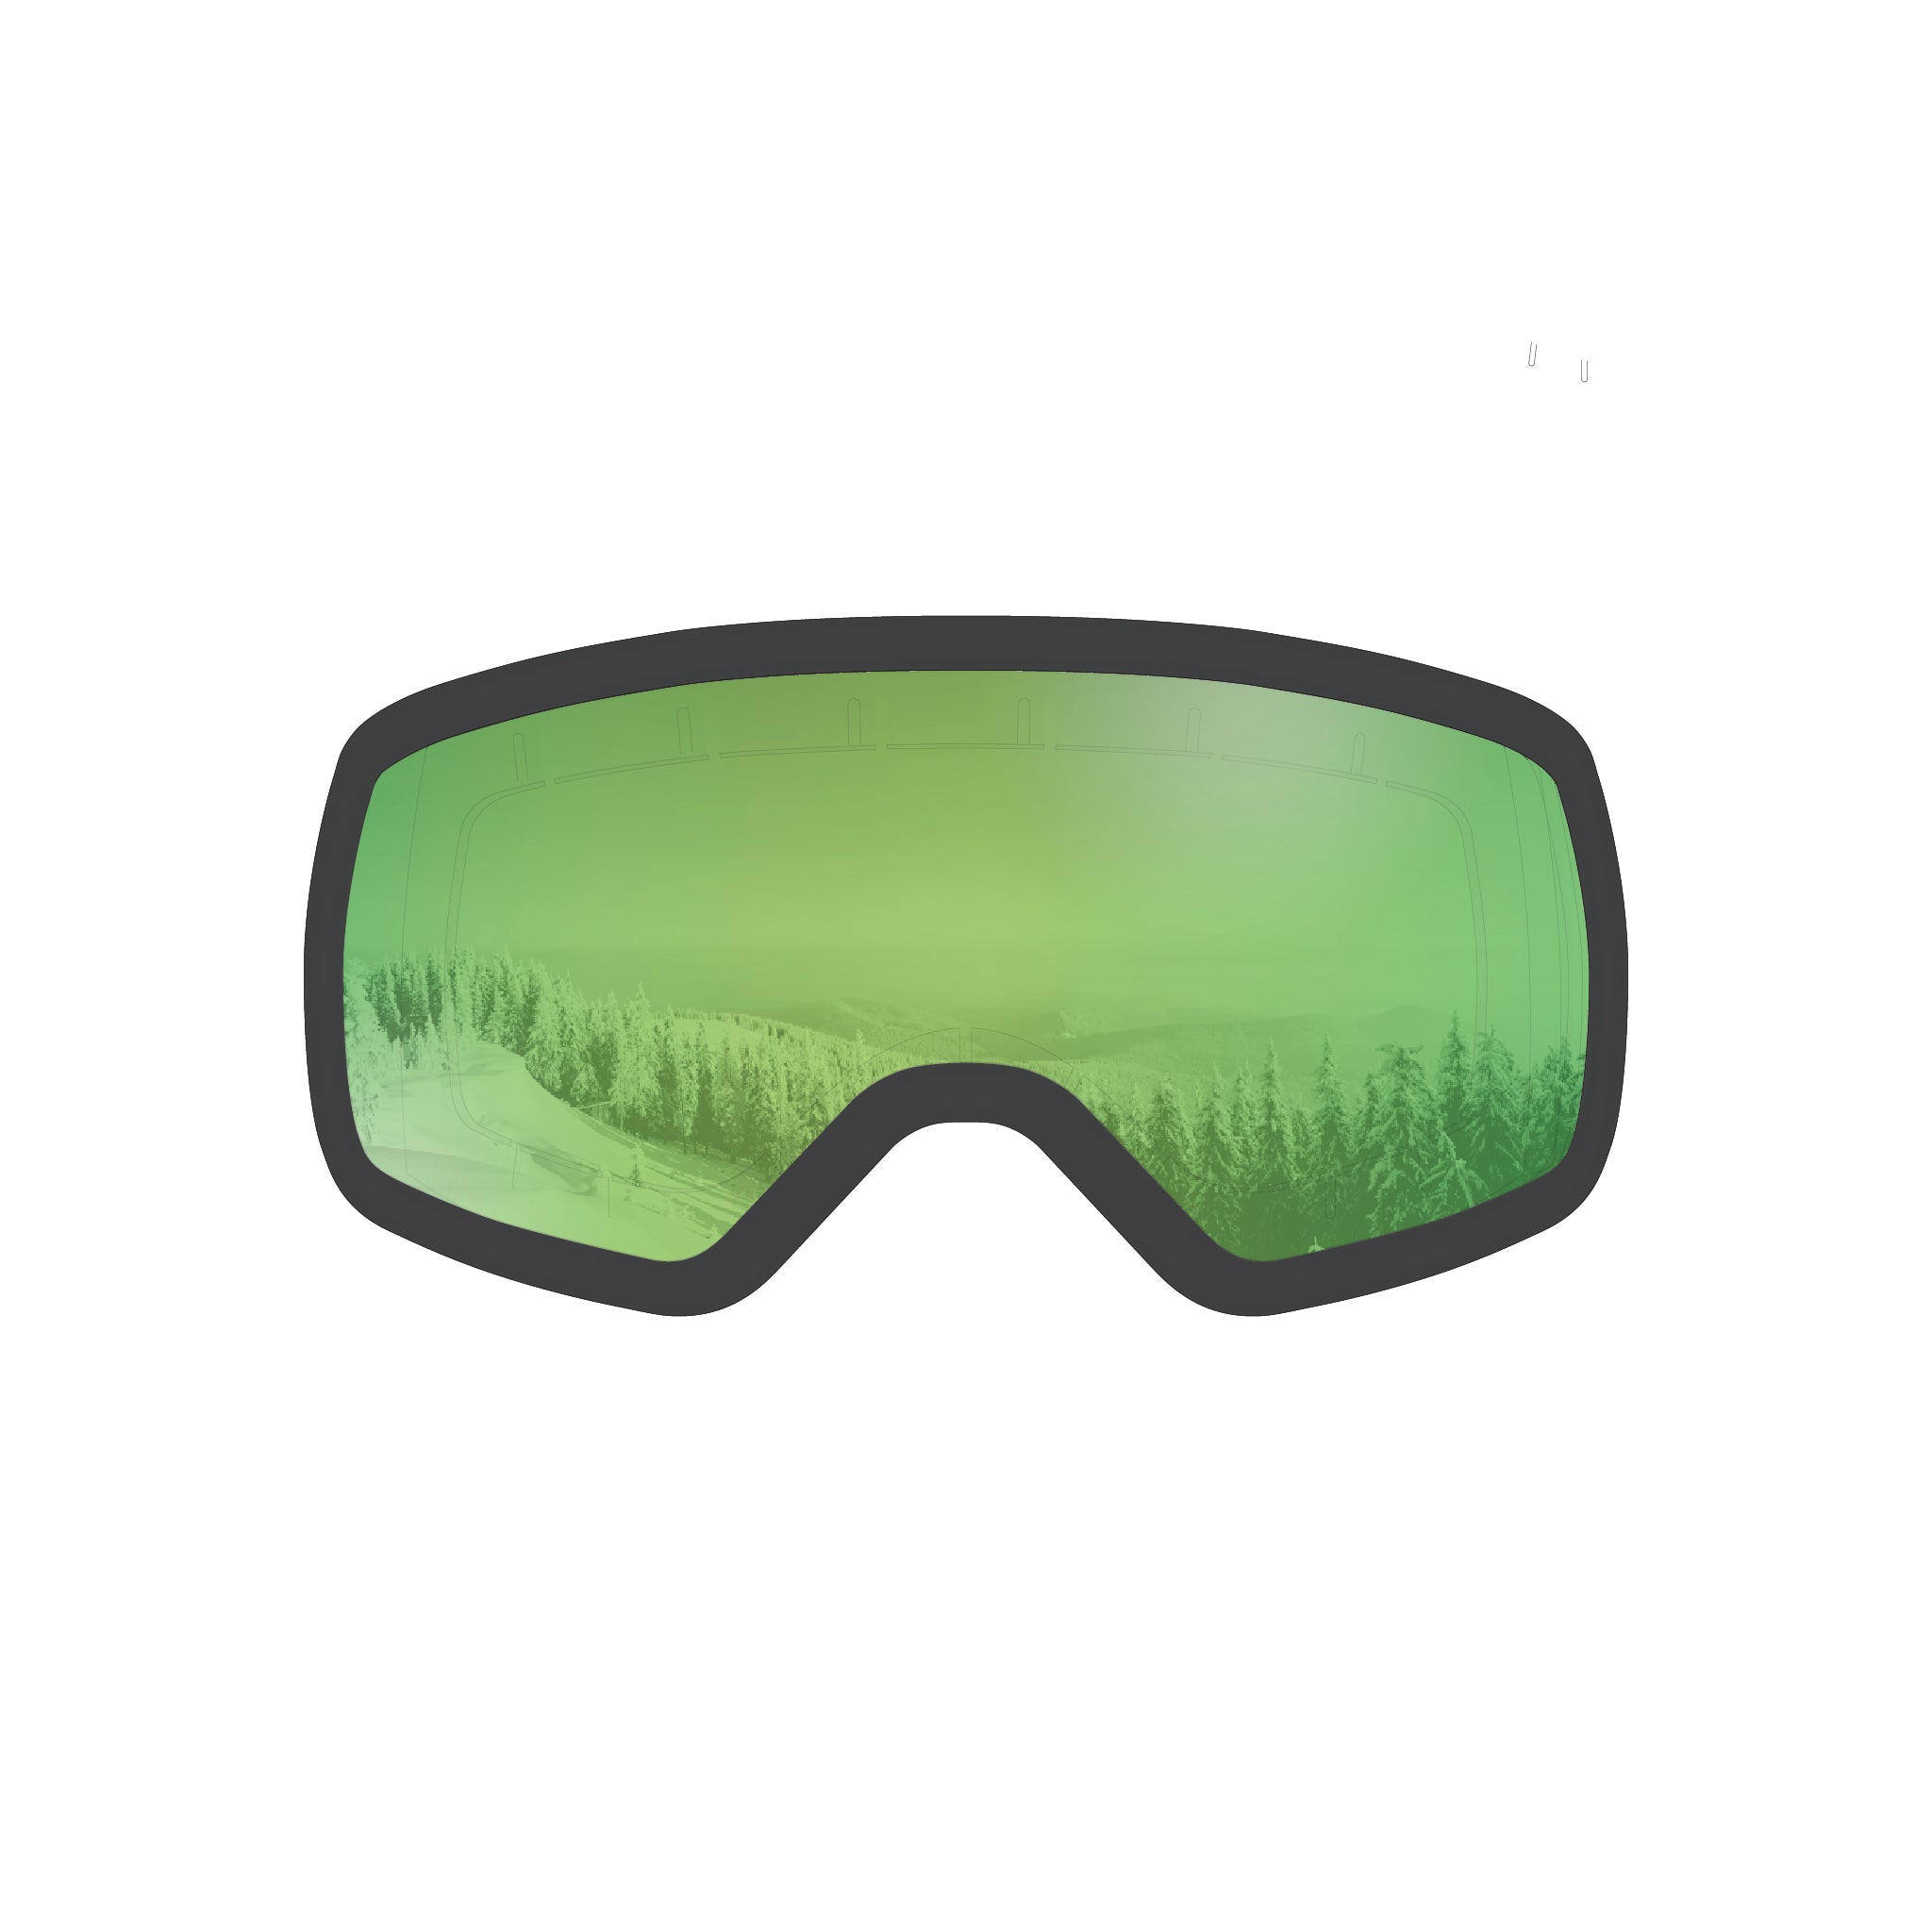  Green Revo Lens and Black Frame - Fits teens, ages 9 -13. Youth ski goggle.